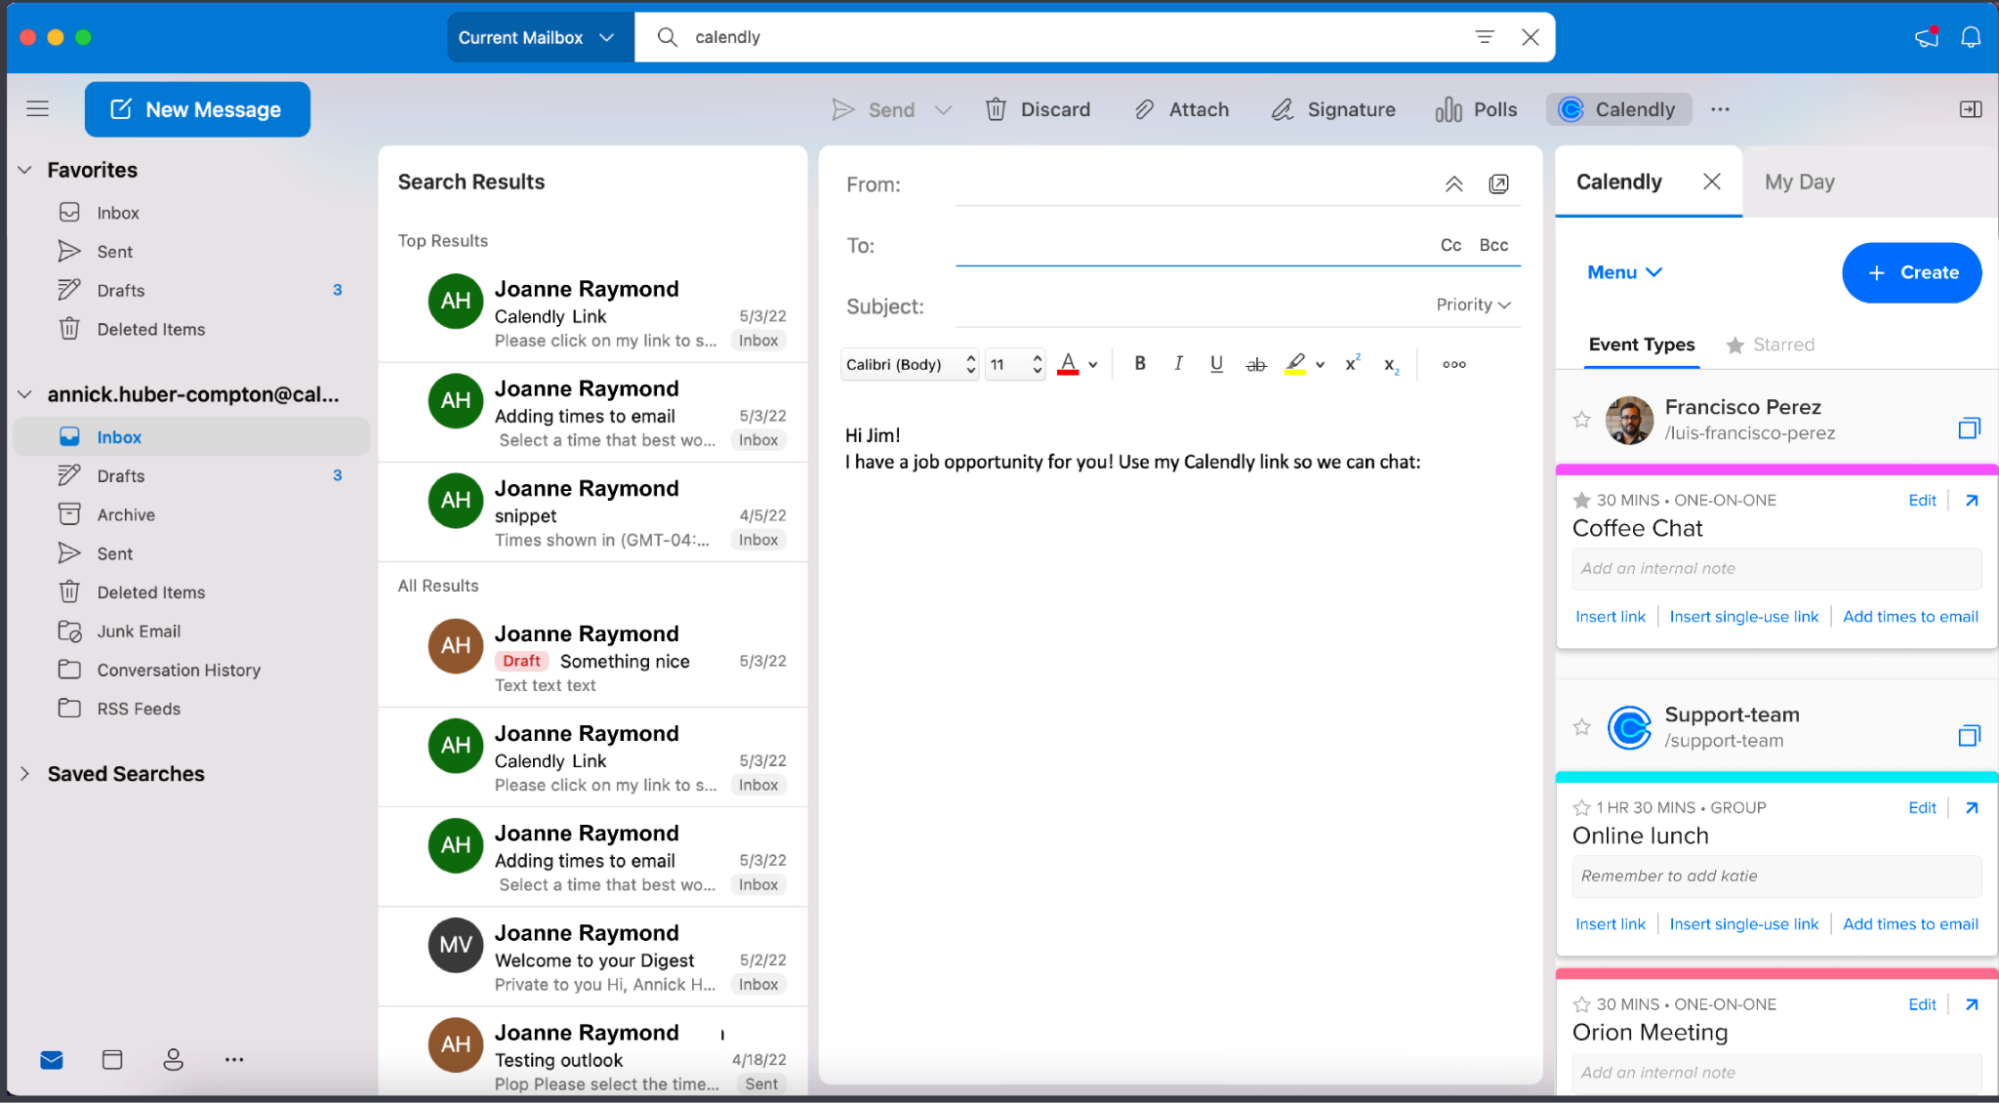 Screenshot of an Outlook inbox with the Calendly add-in panel open showing several Event Types, including the option to "Add times to email".